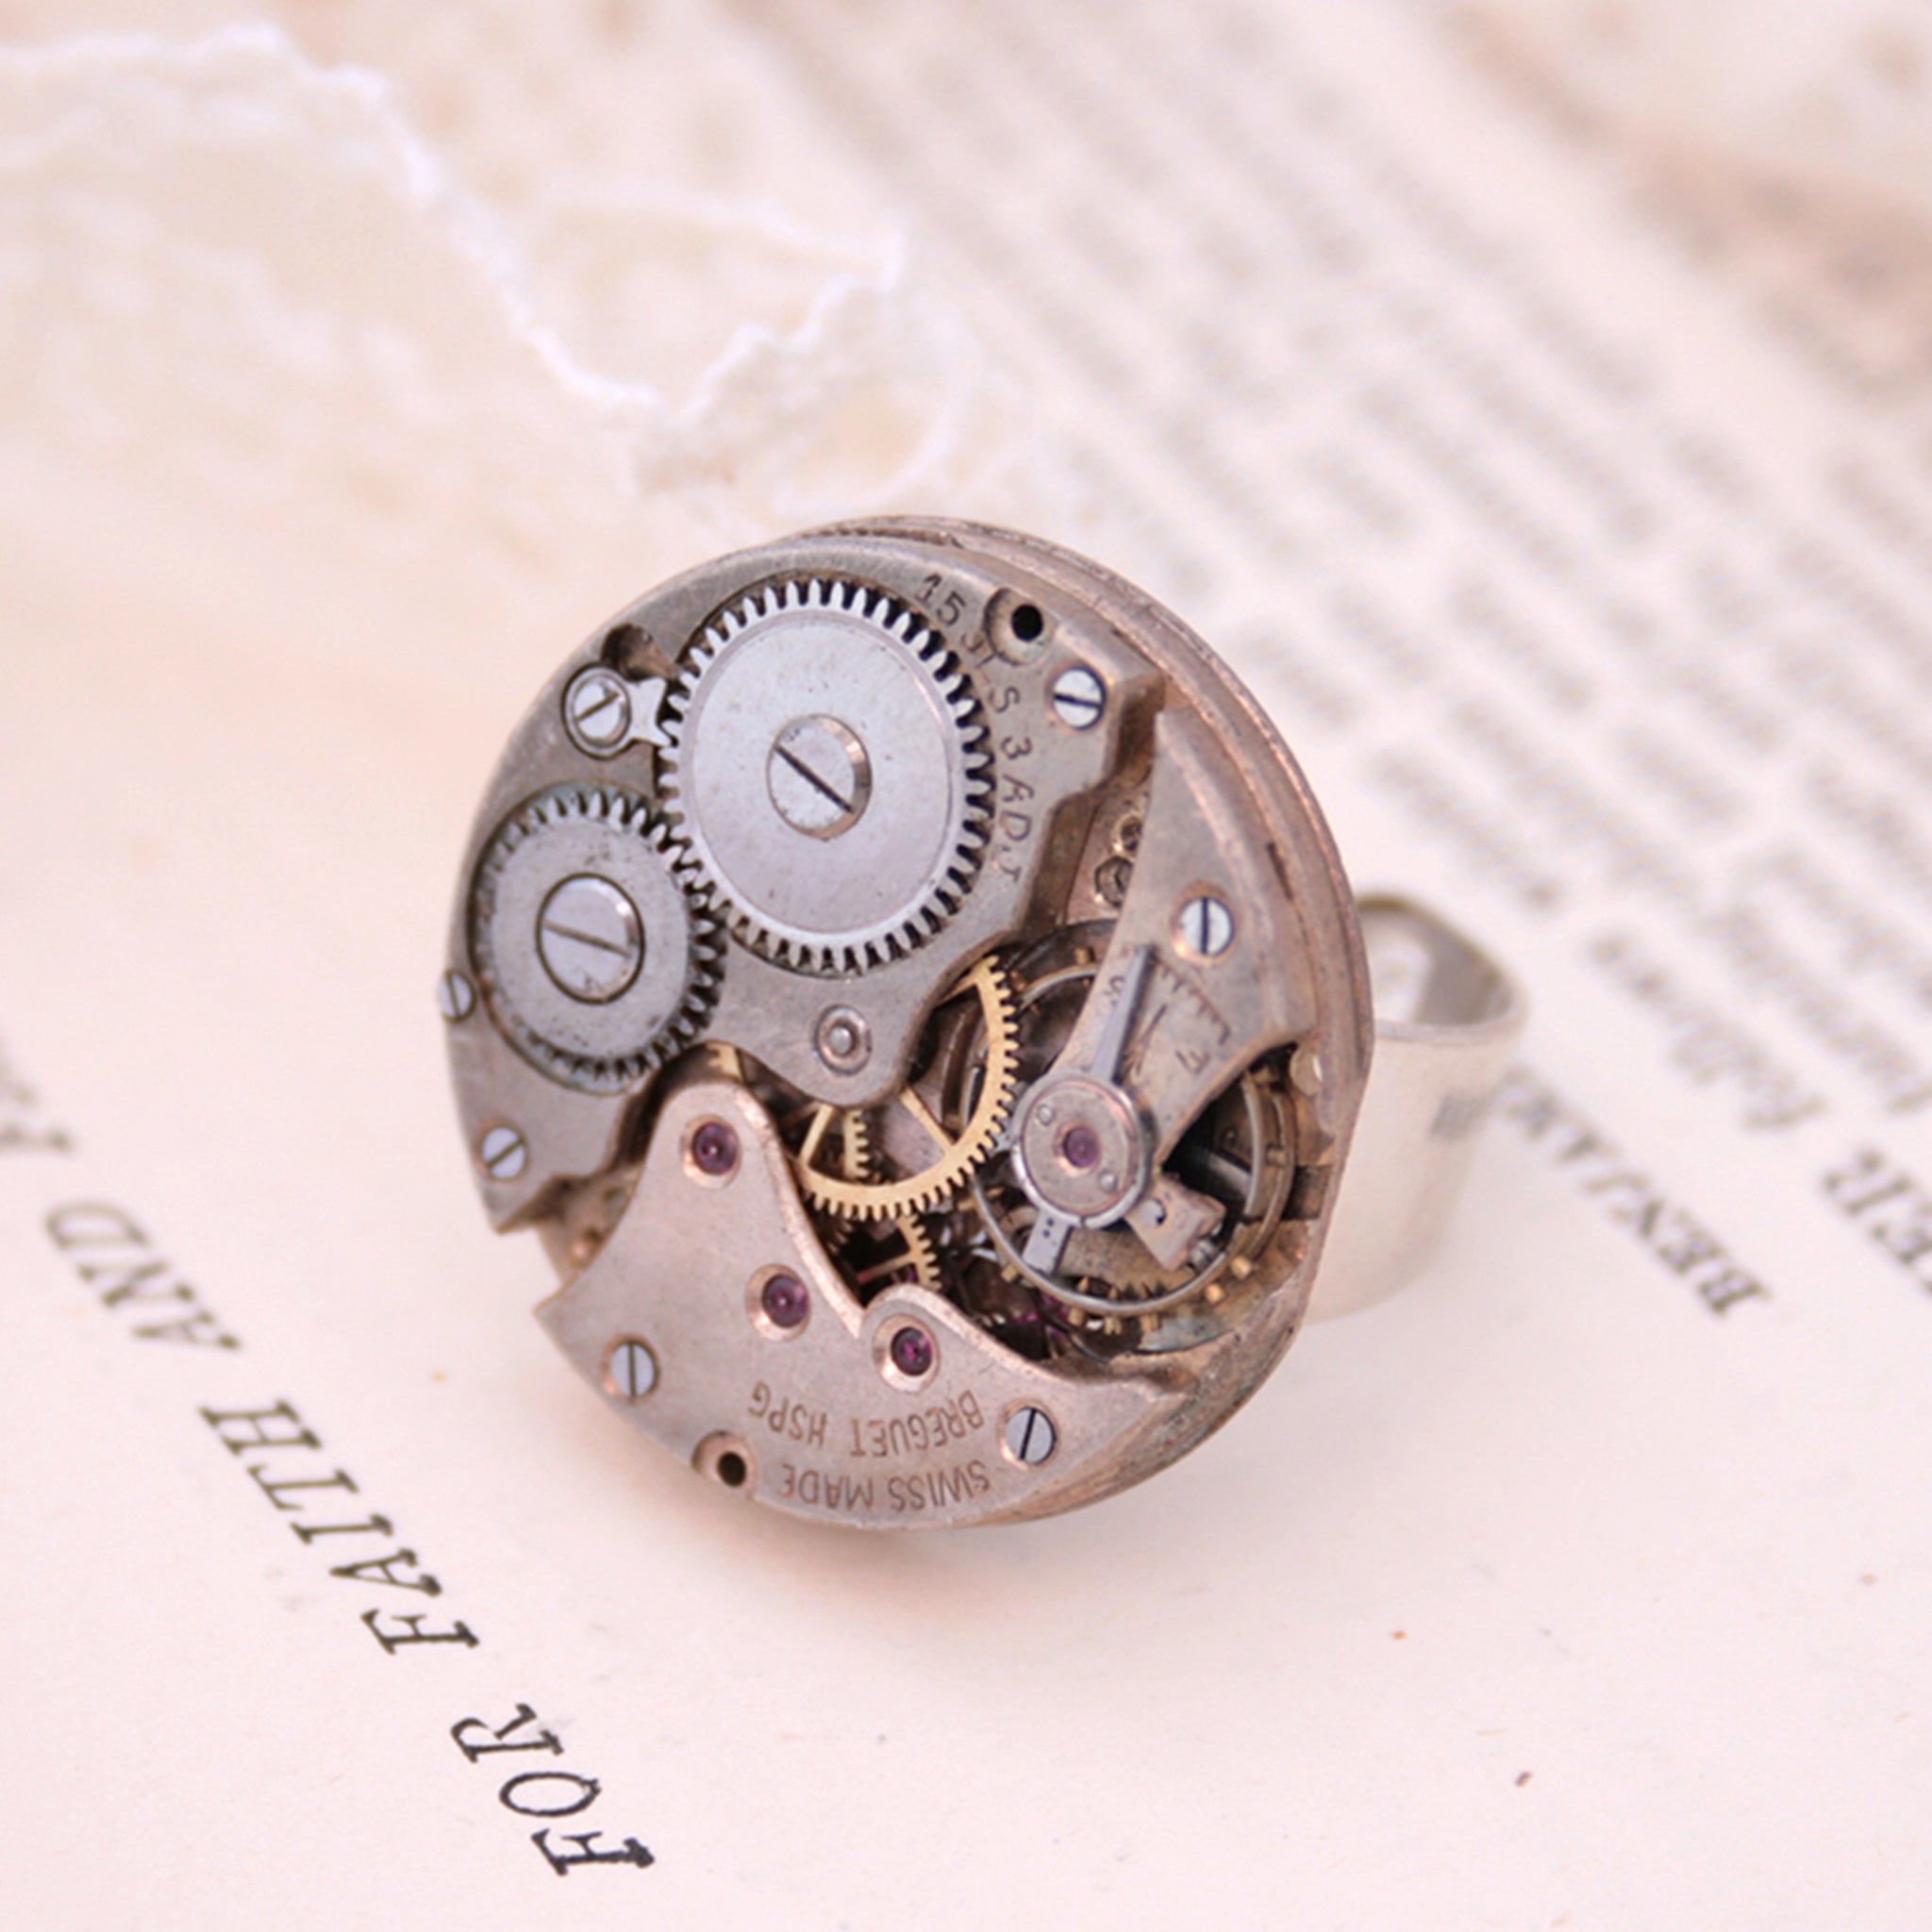 stunning steampunk ring has been made using authentic large wristwatch inside in old silver color.